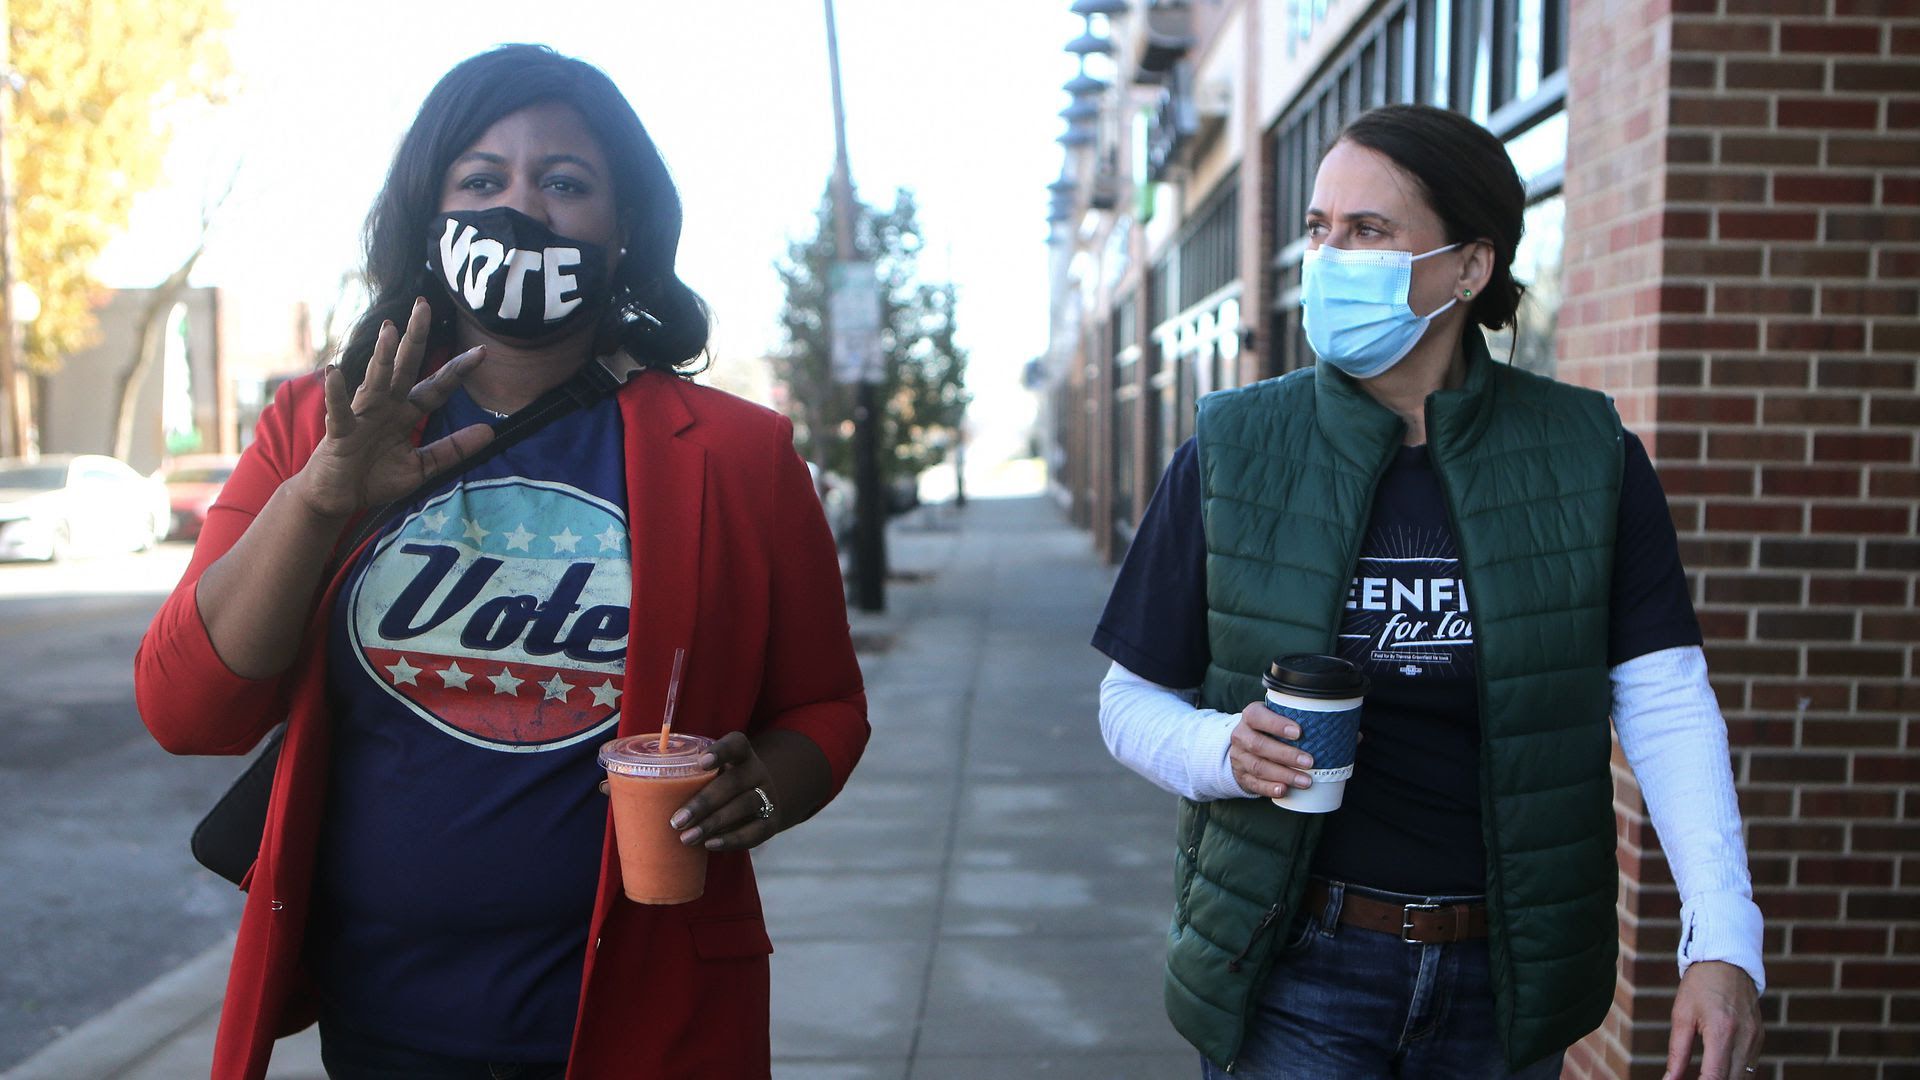 Deidre Dejear, wearing a mask and shirt that say "vote," speaks with former Senate candidate Theresa Greenfield.